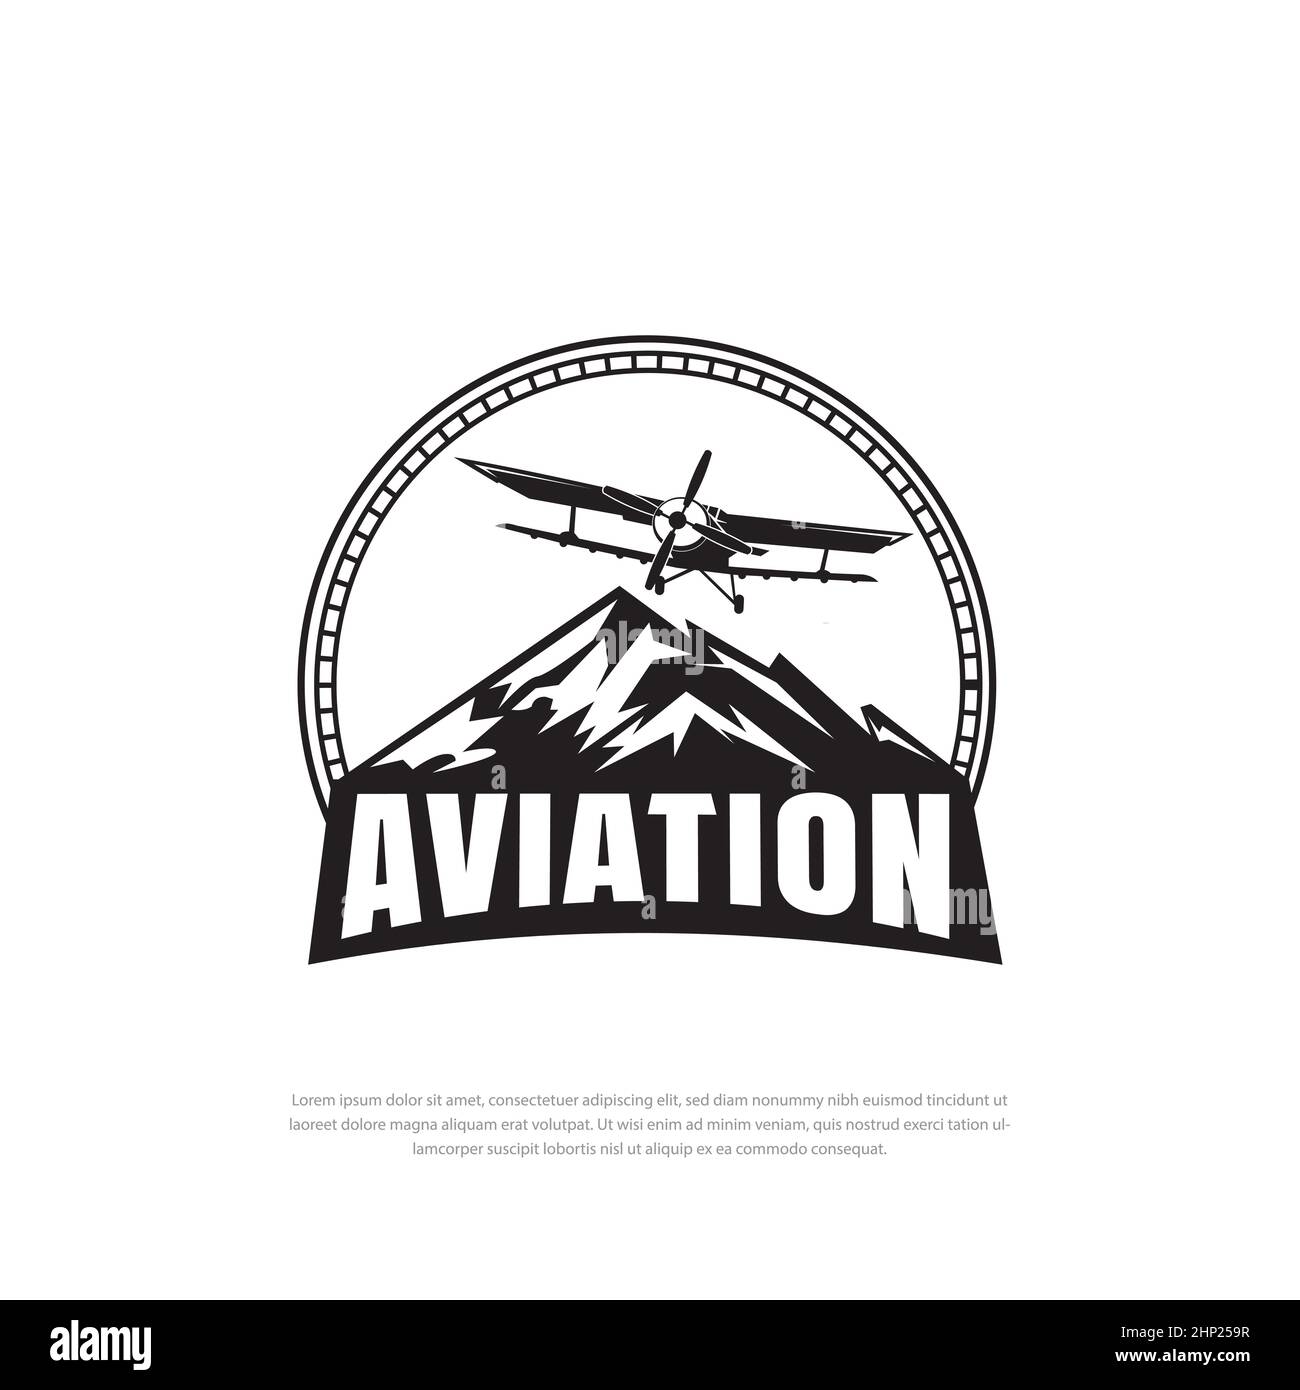 Vintage airplane logo design. Retro Grunge Airplane with emblem logo, air transport in sky on mountain background Stock Vector